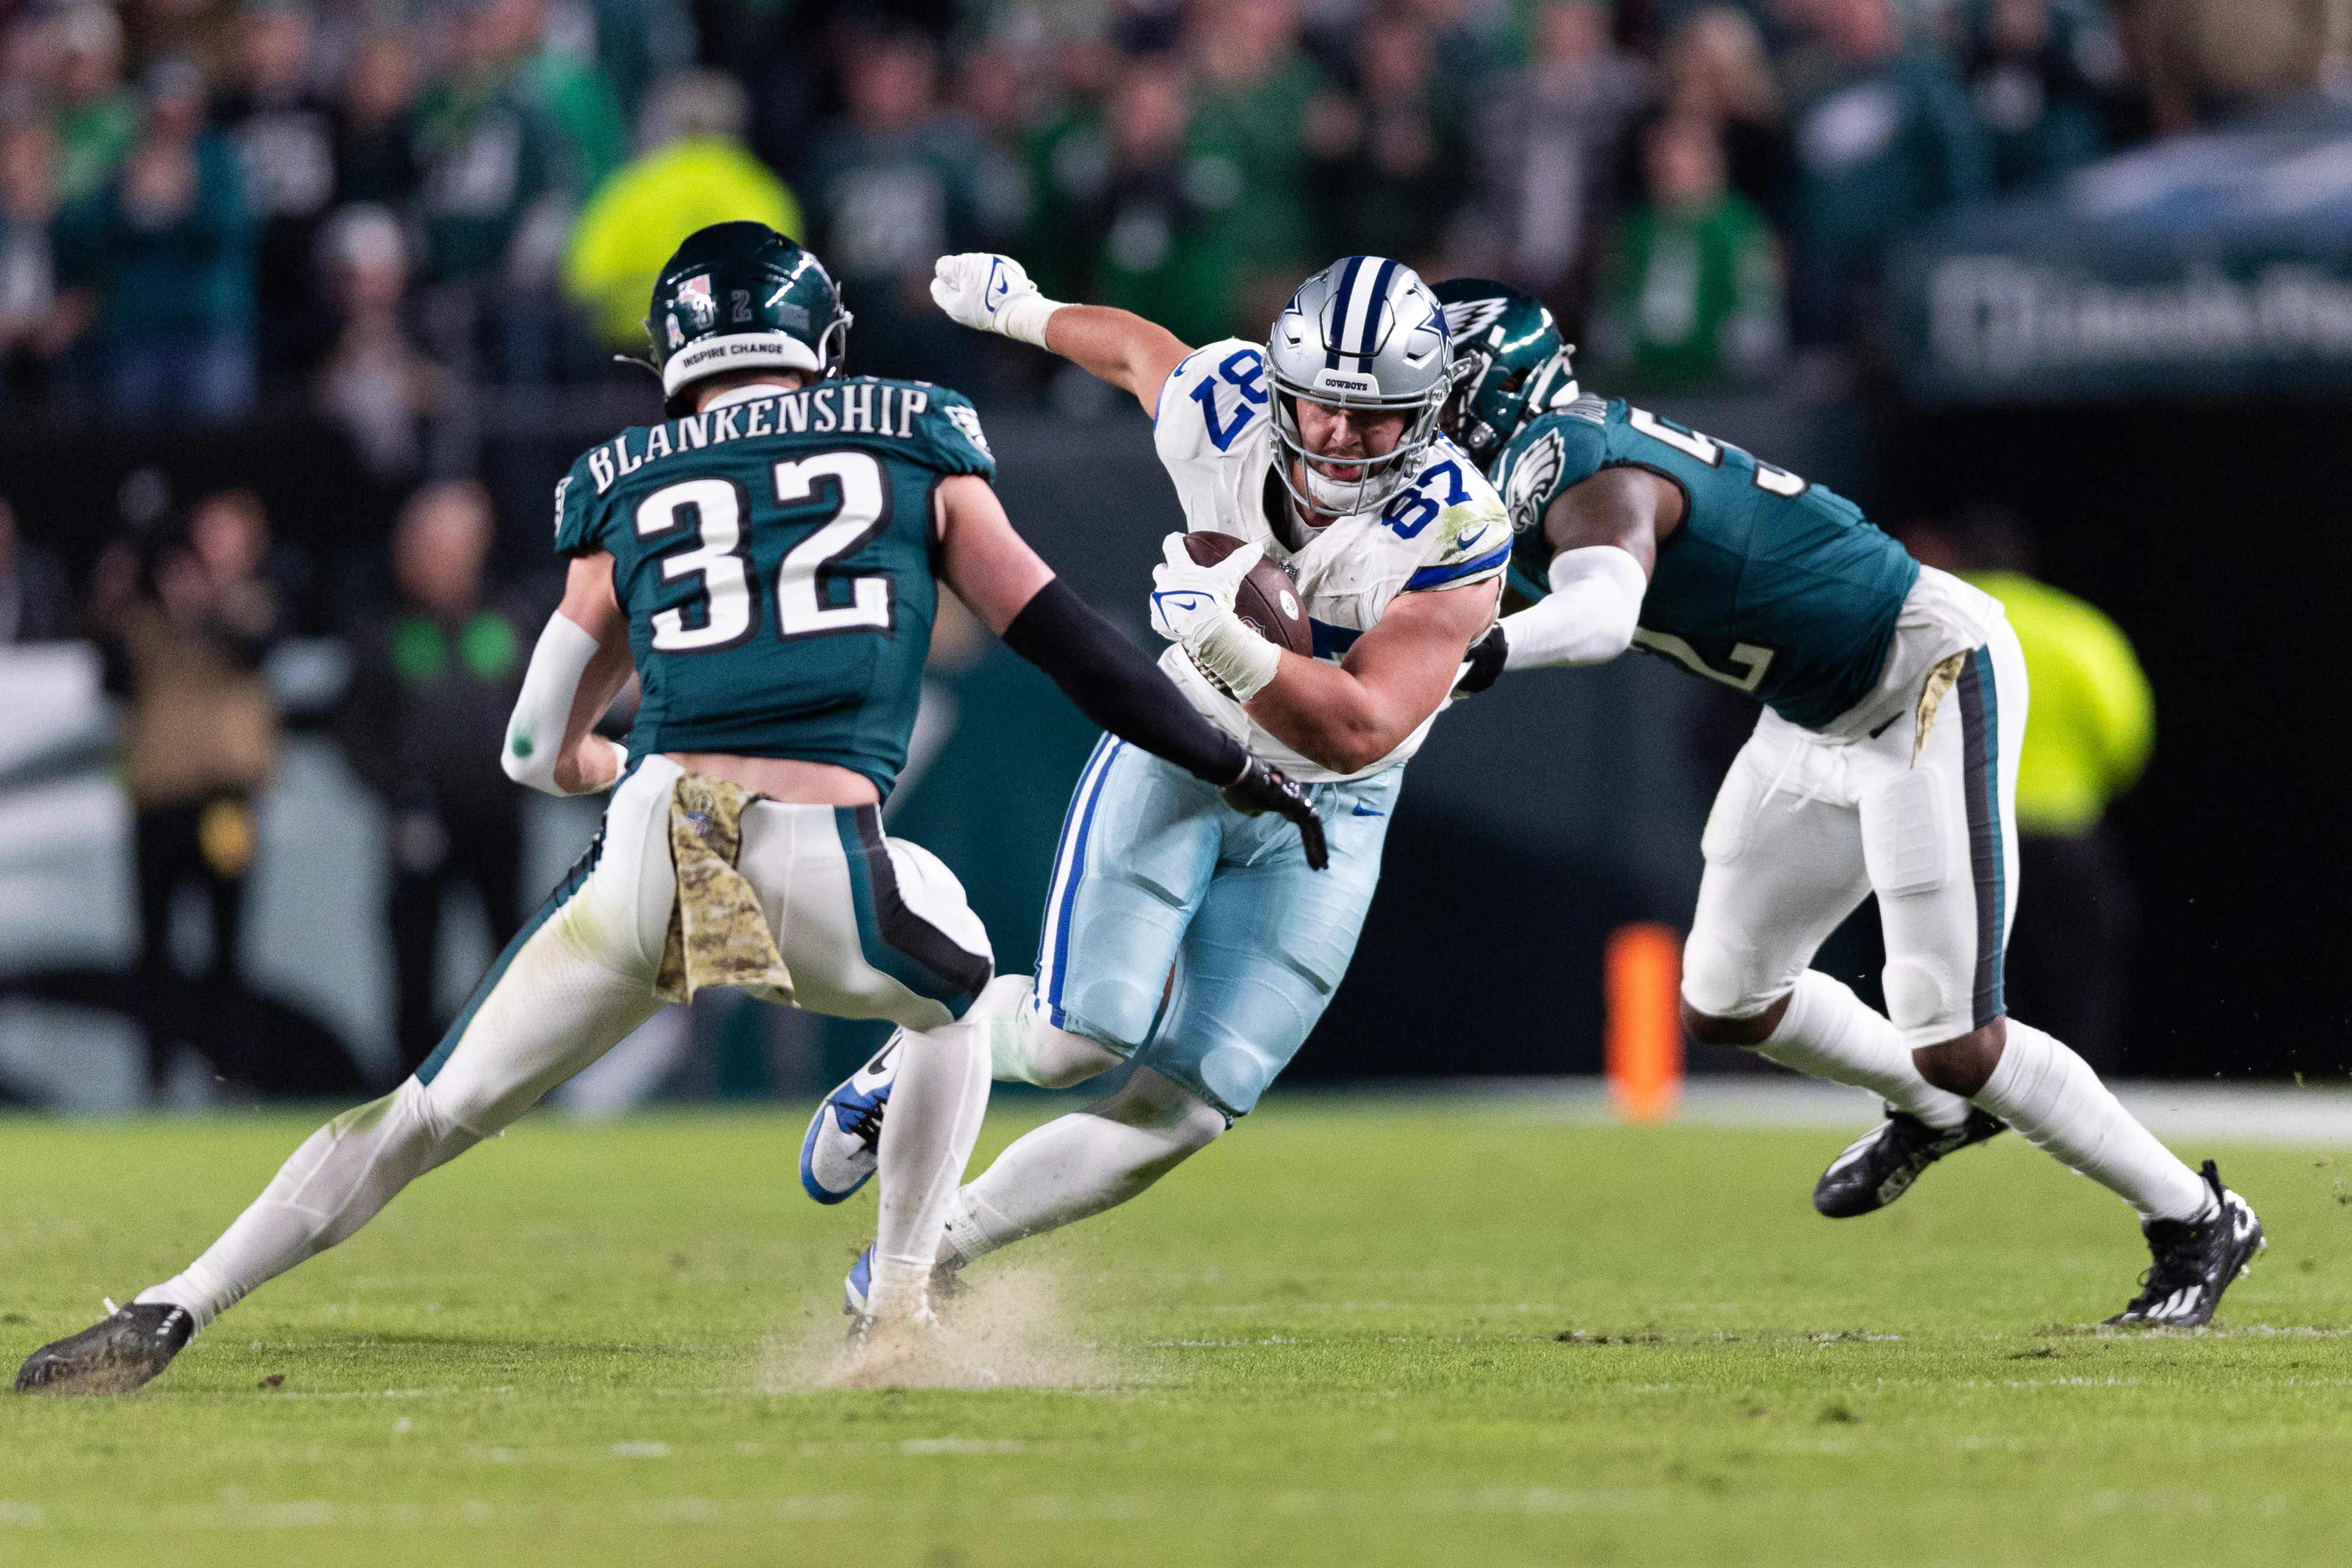 Cowboys tight end Jake Ferguson had his best game of his young career against the Eagles.